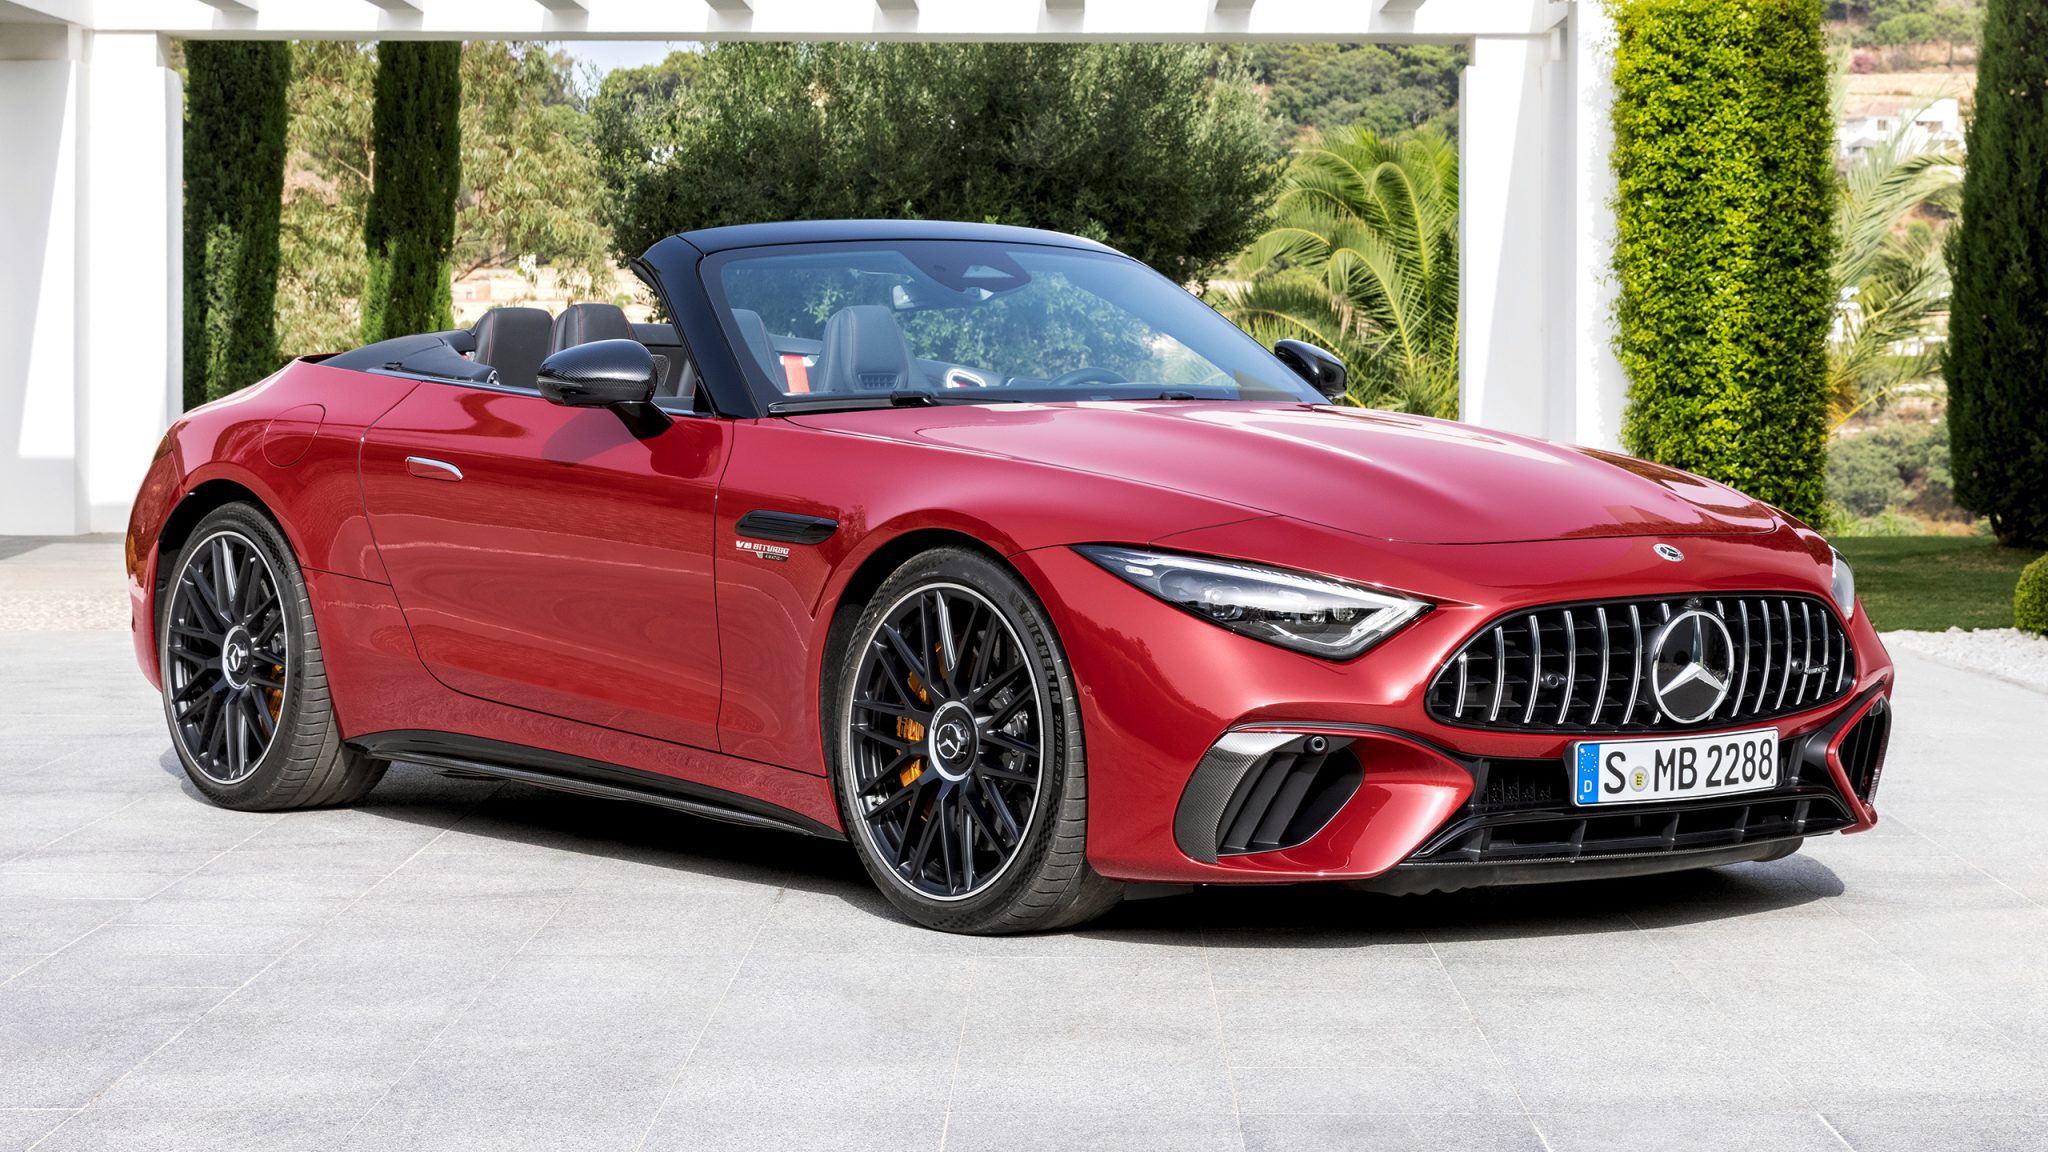 Front-angled view of a red Mercedes-AMG SL 63 roadster.